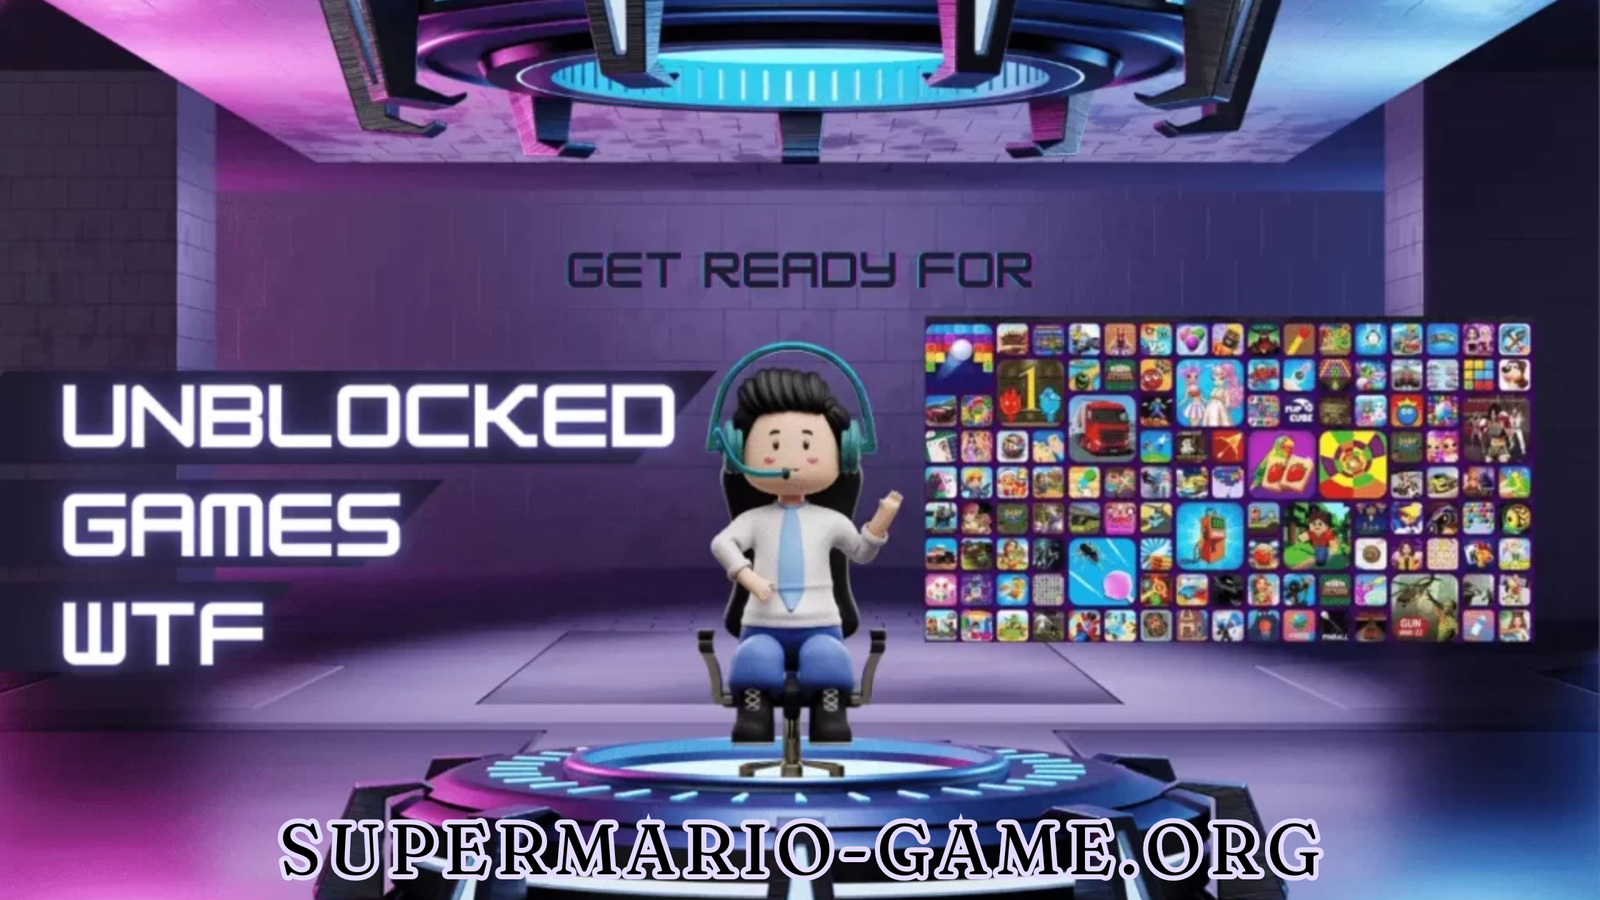 Unlocked Game WTF: The Ultimate Solution or a Risky Distraction?